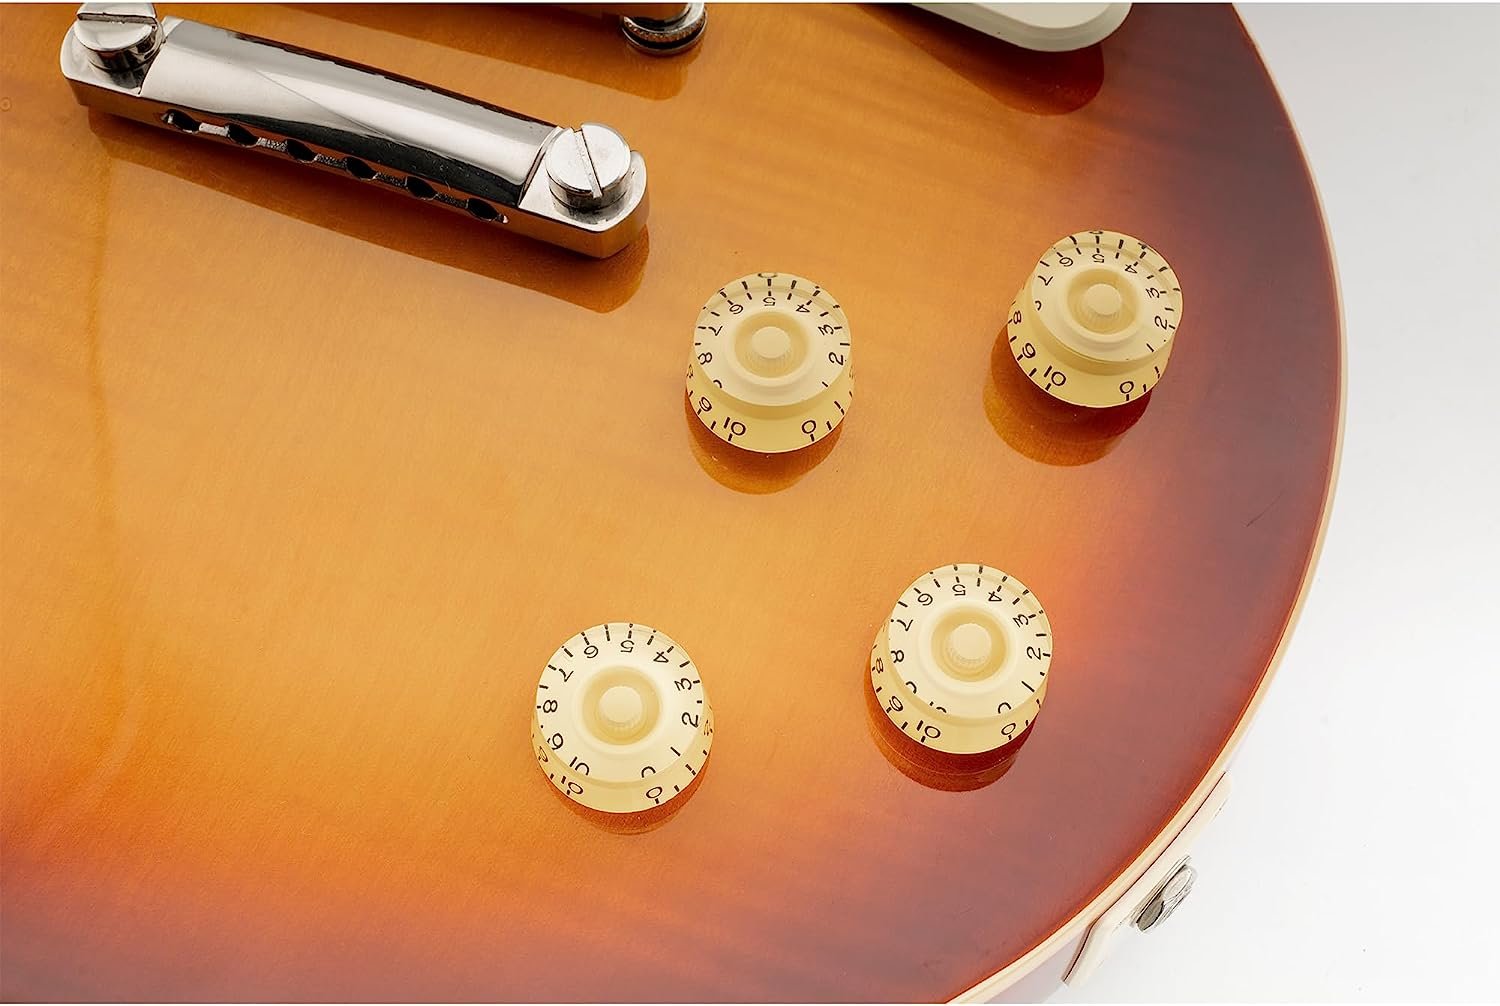 Imperial Speed Guitar Knobs for Les Paul